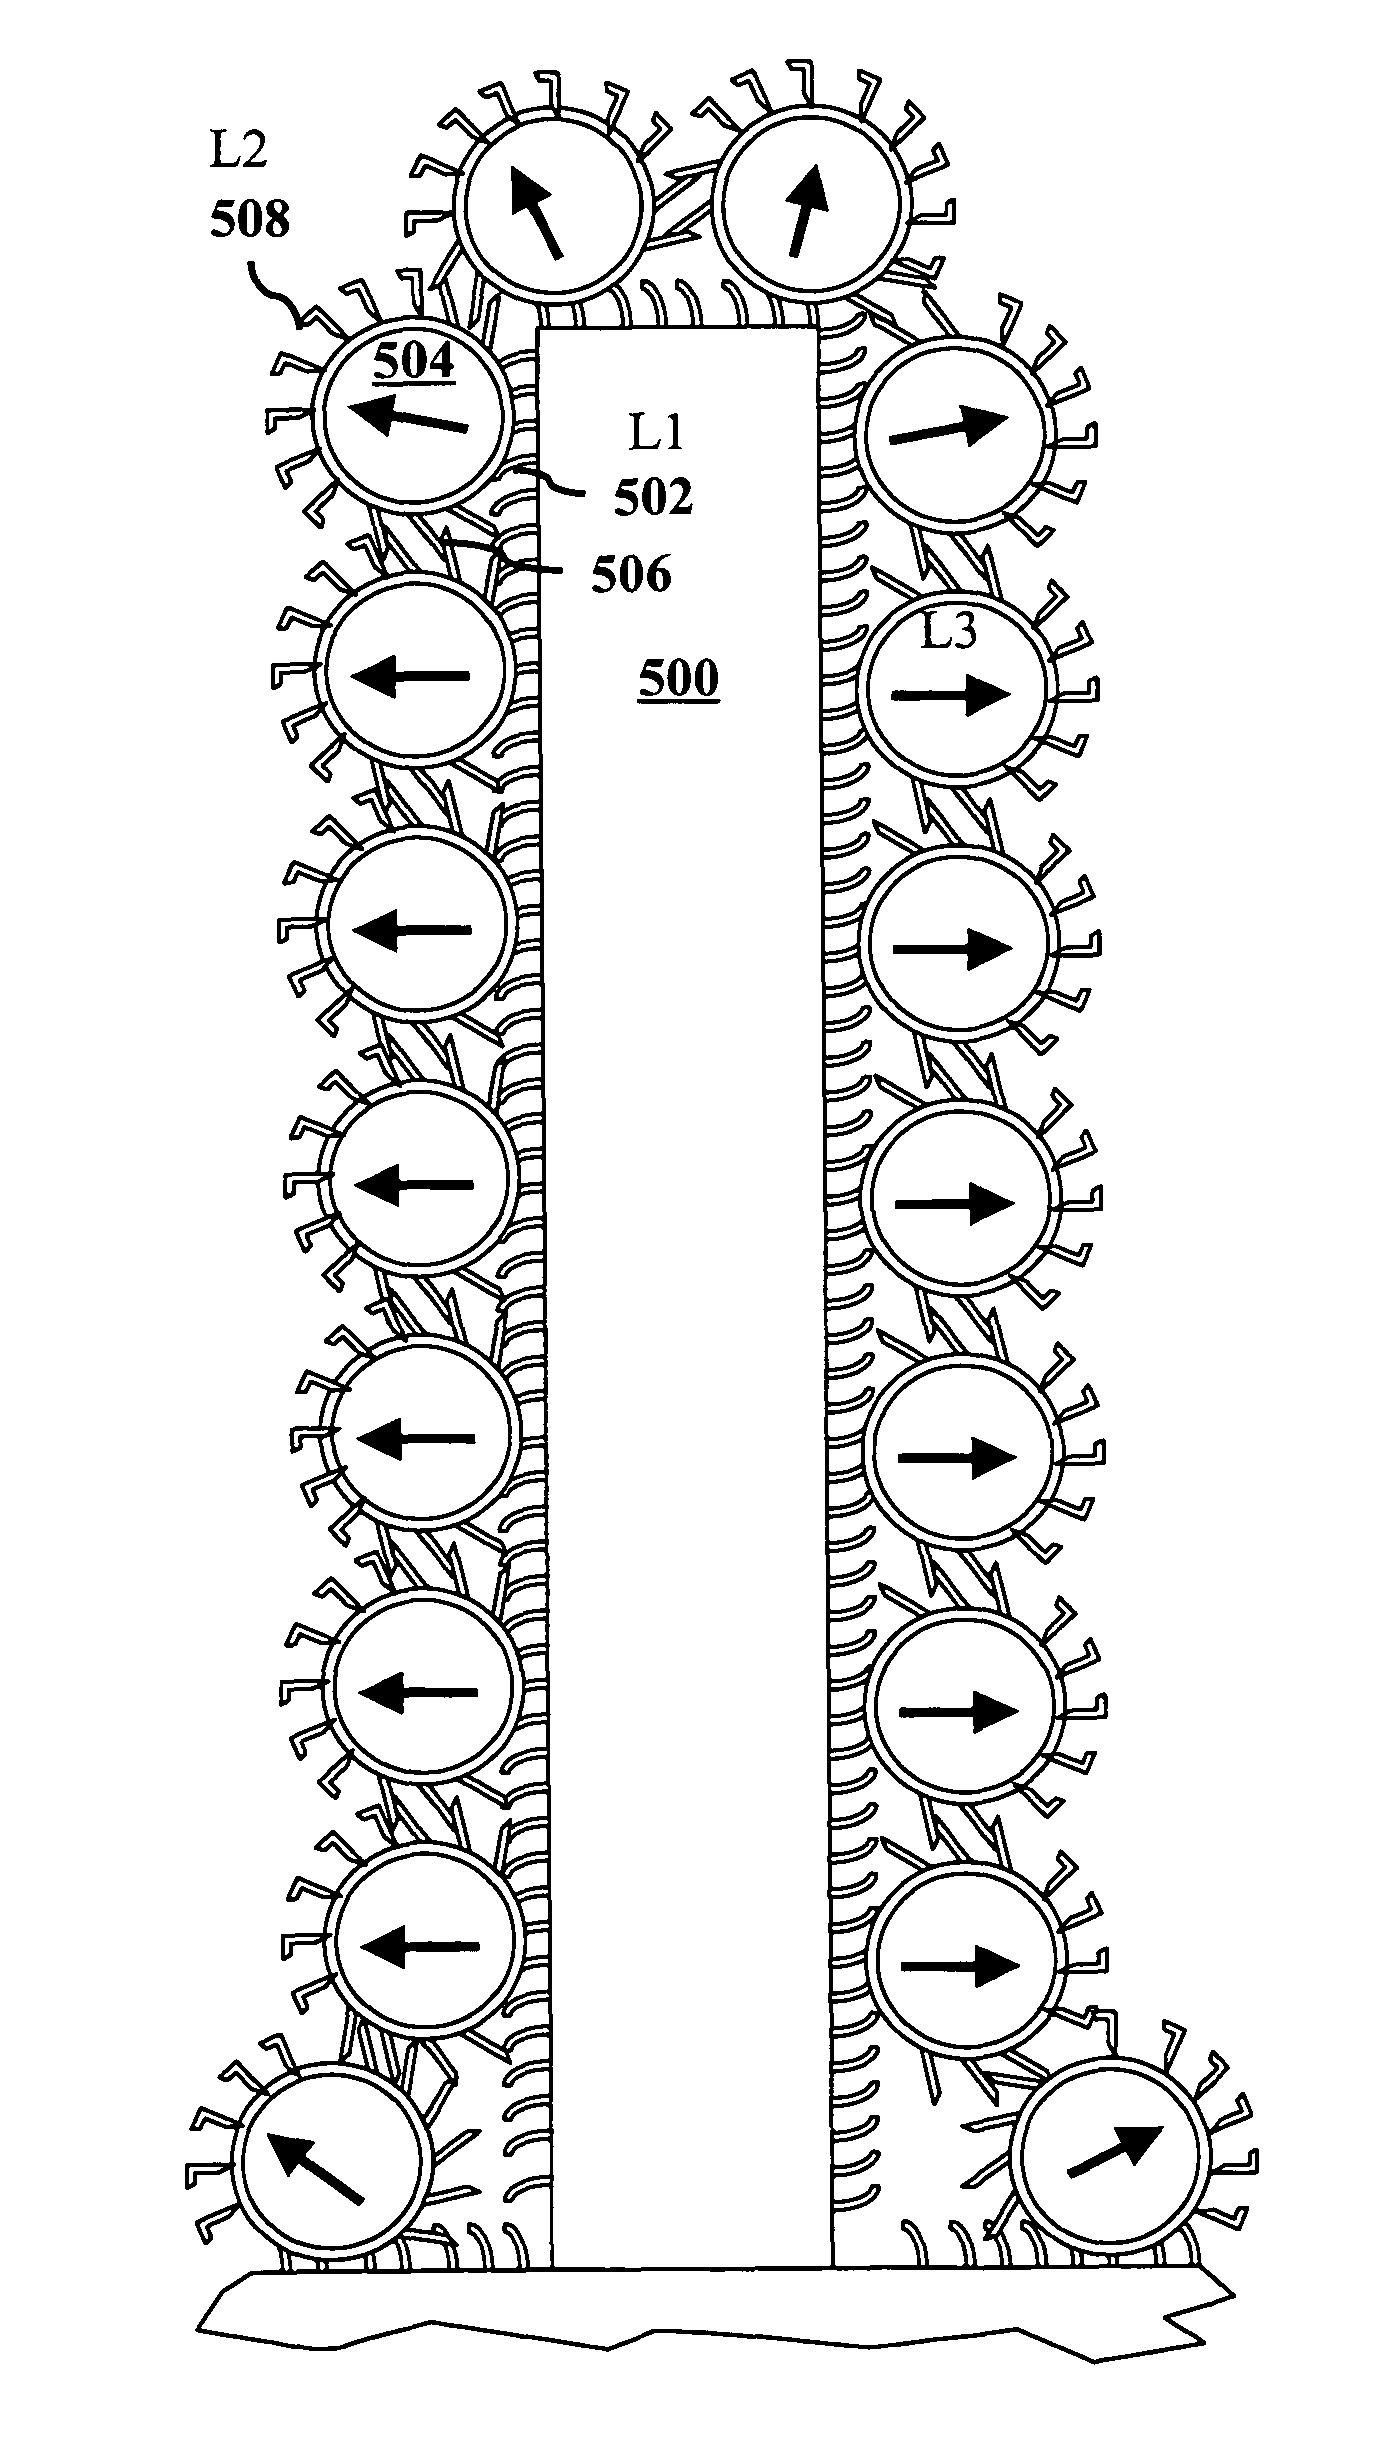 Photovoltaic devices having nanoparticle dipoles for enhanced performance and methods for making same